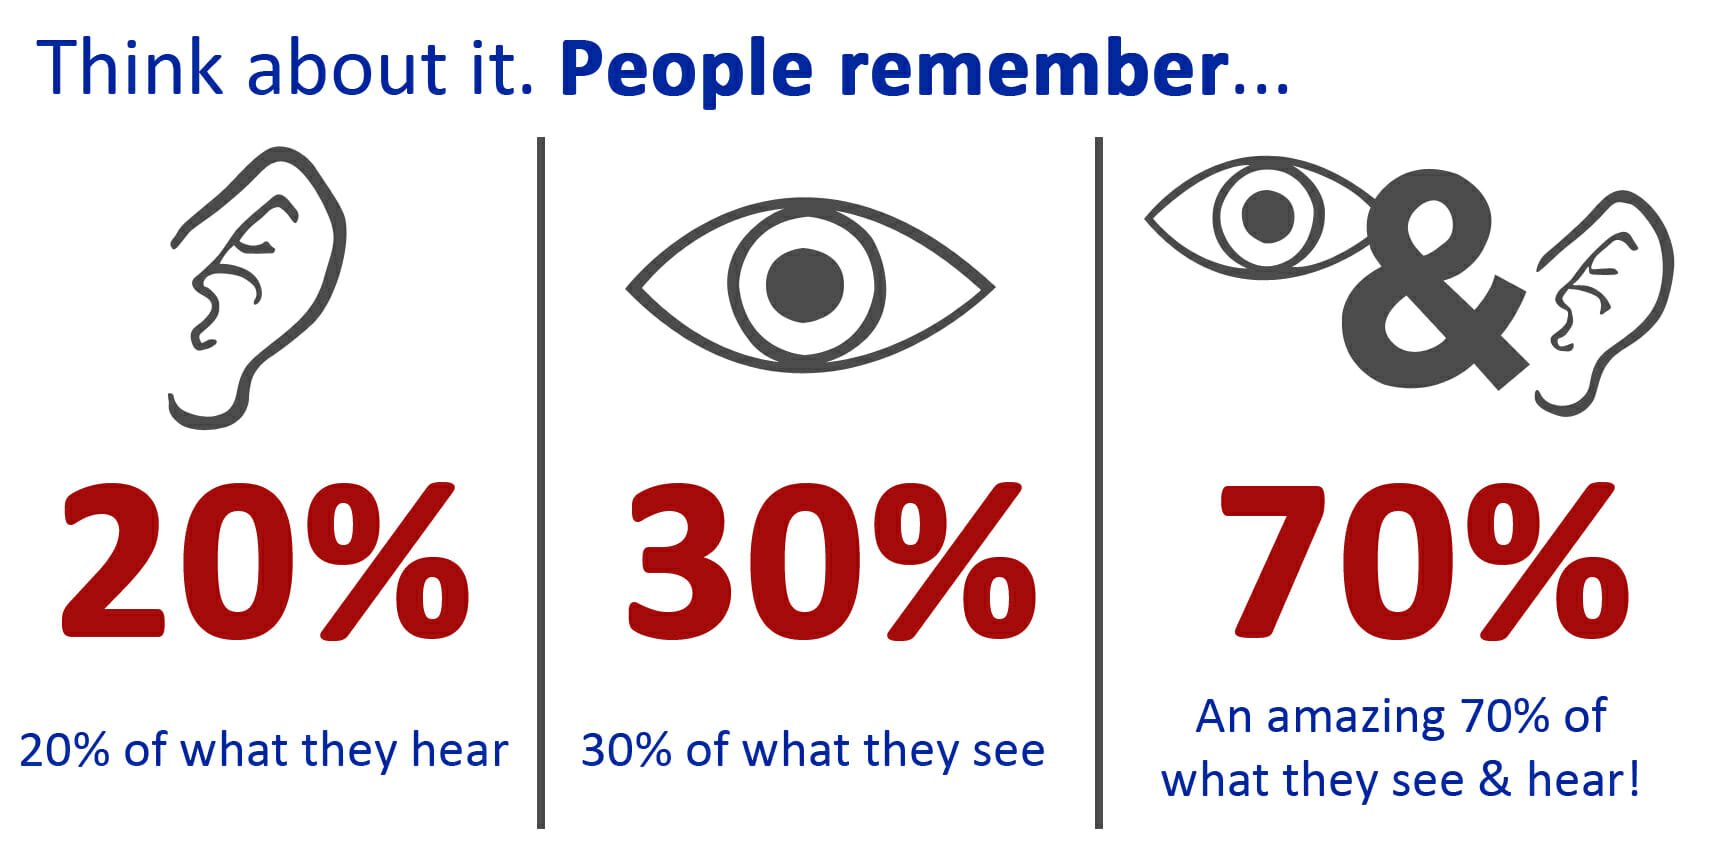 70% people remember visuals